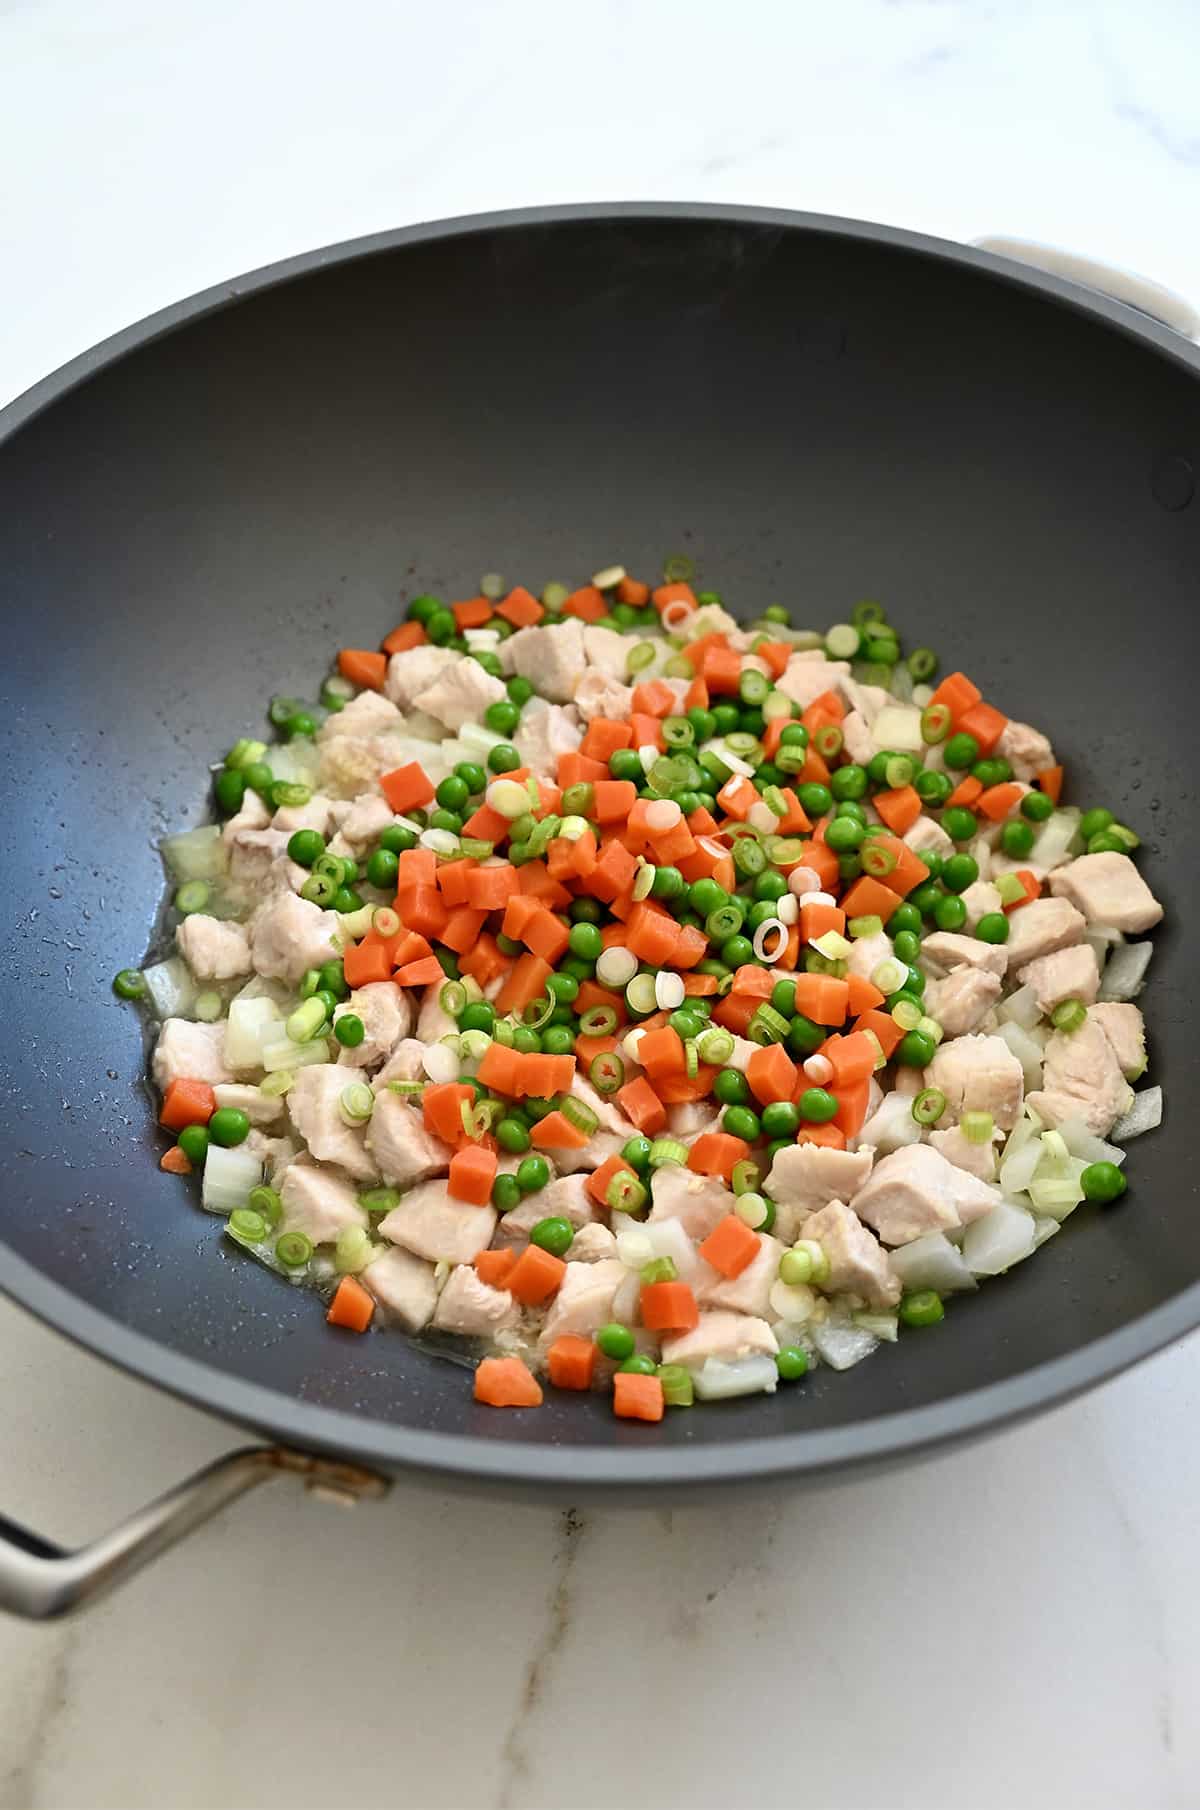 Peas and diced carrots with cooked chicken breast pieces in a wok.